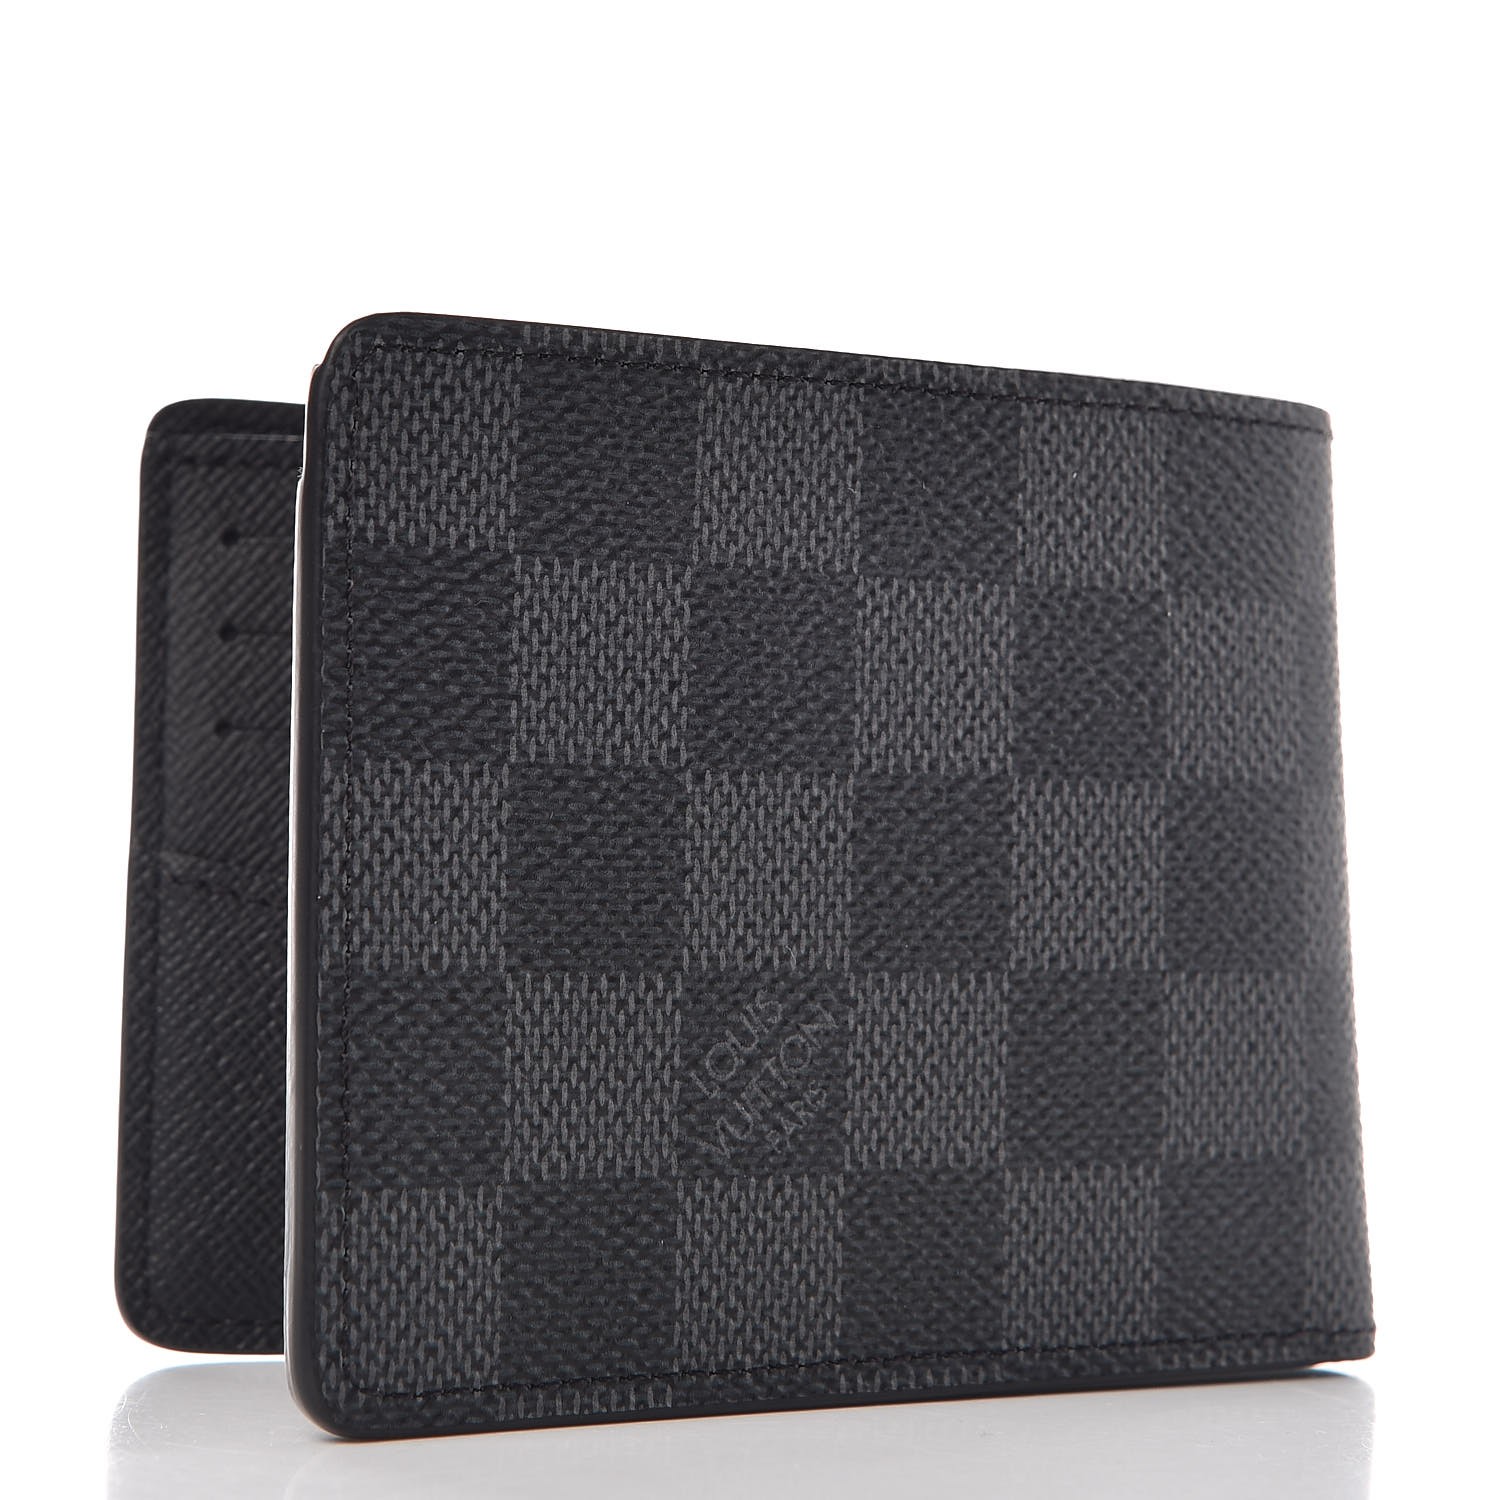 Lv Slender Id Wallet Review  Natural Resource Department